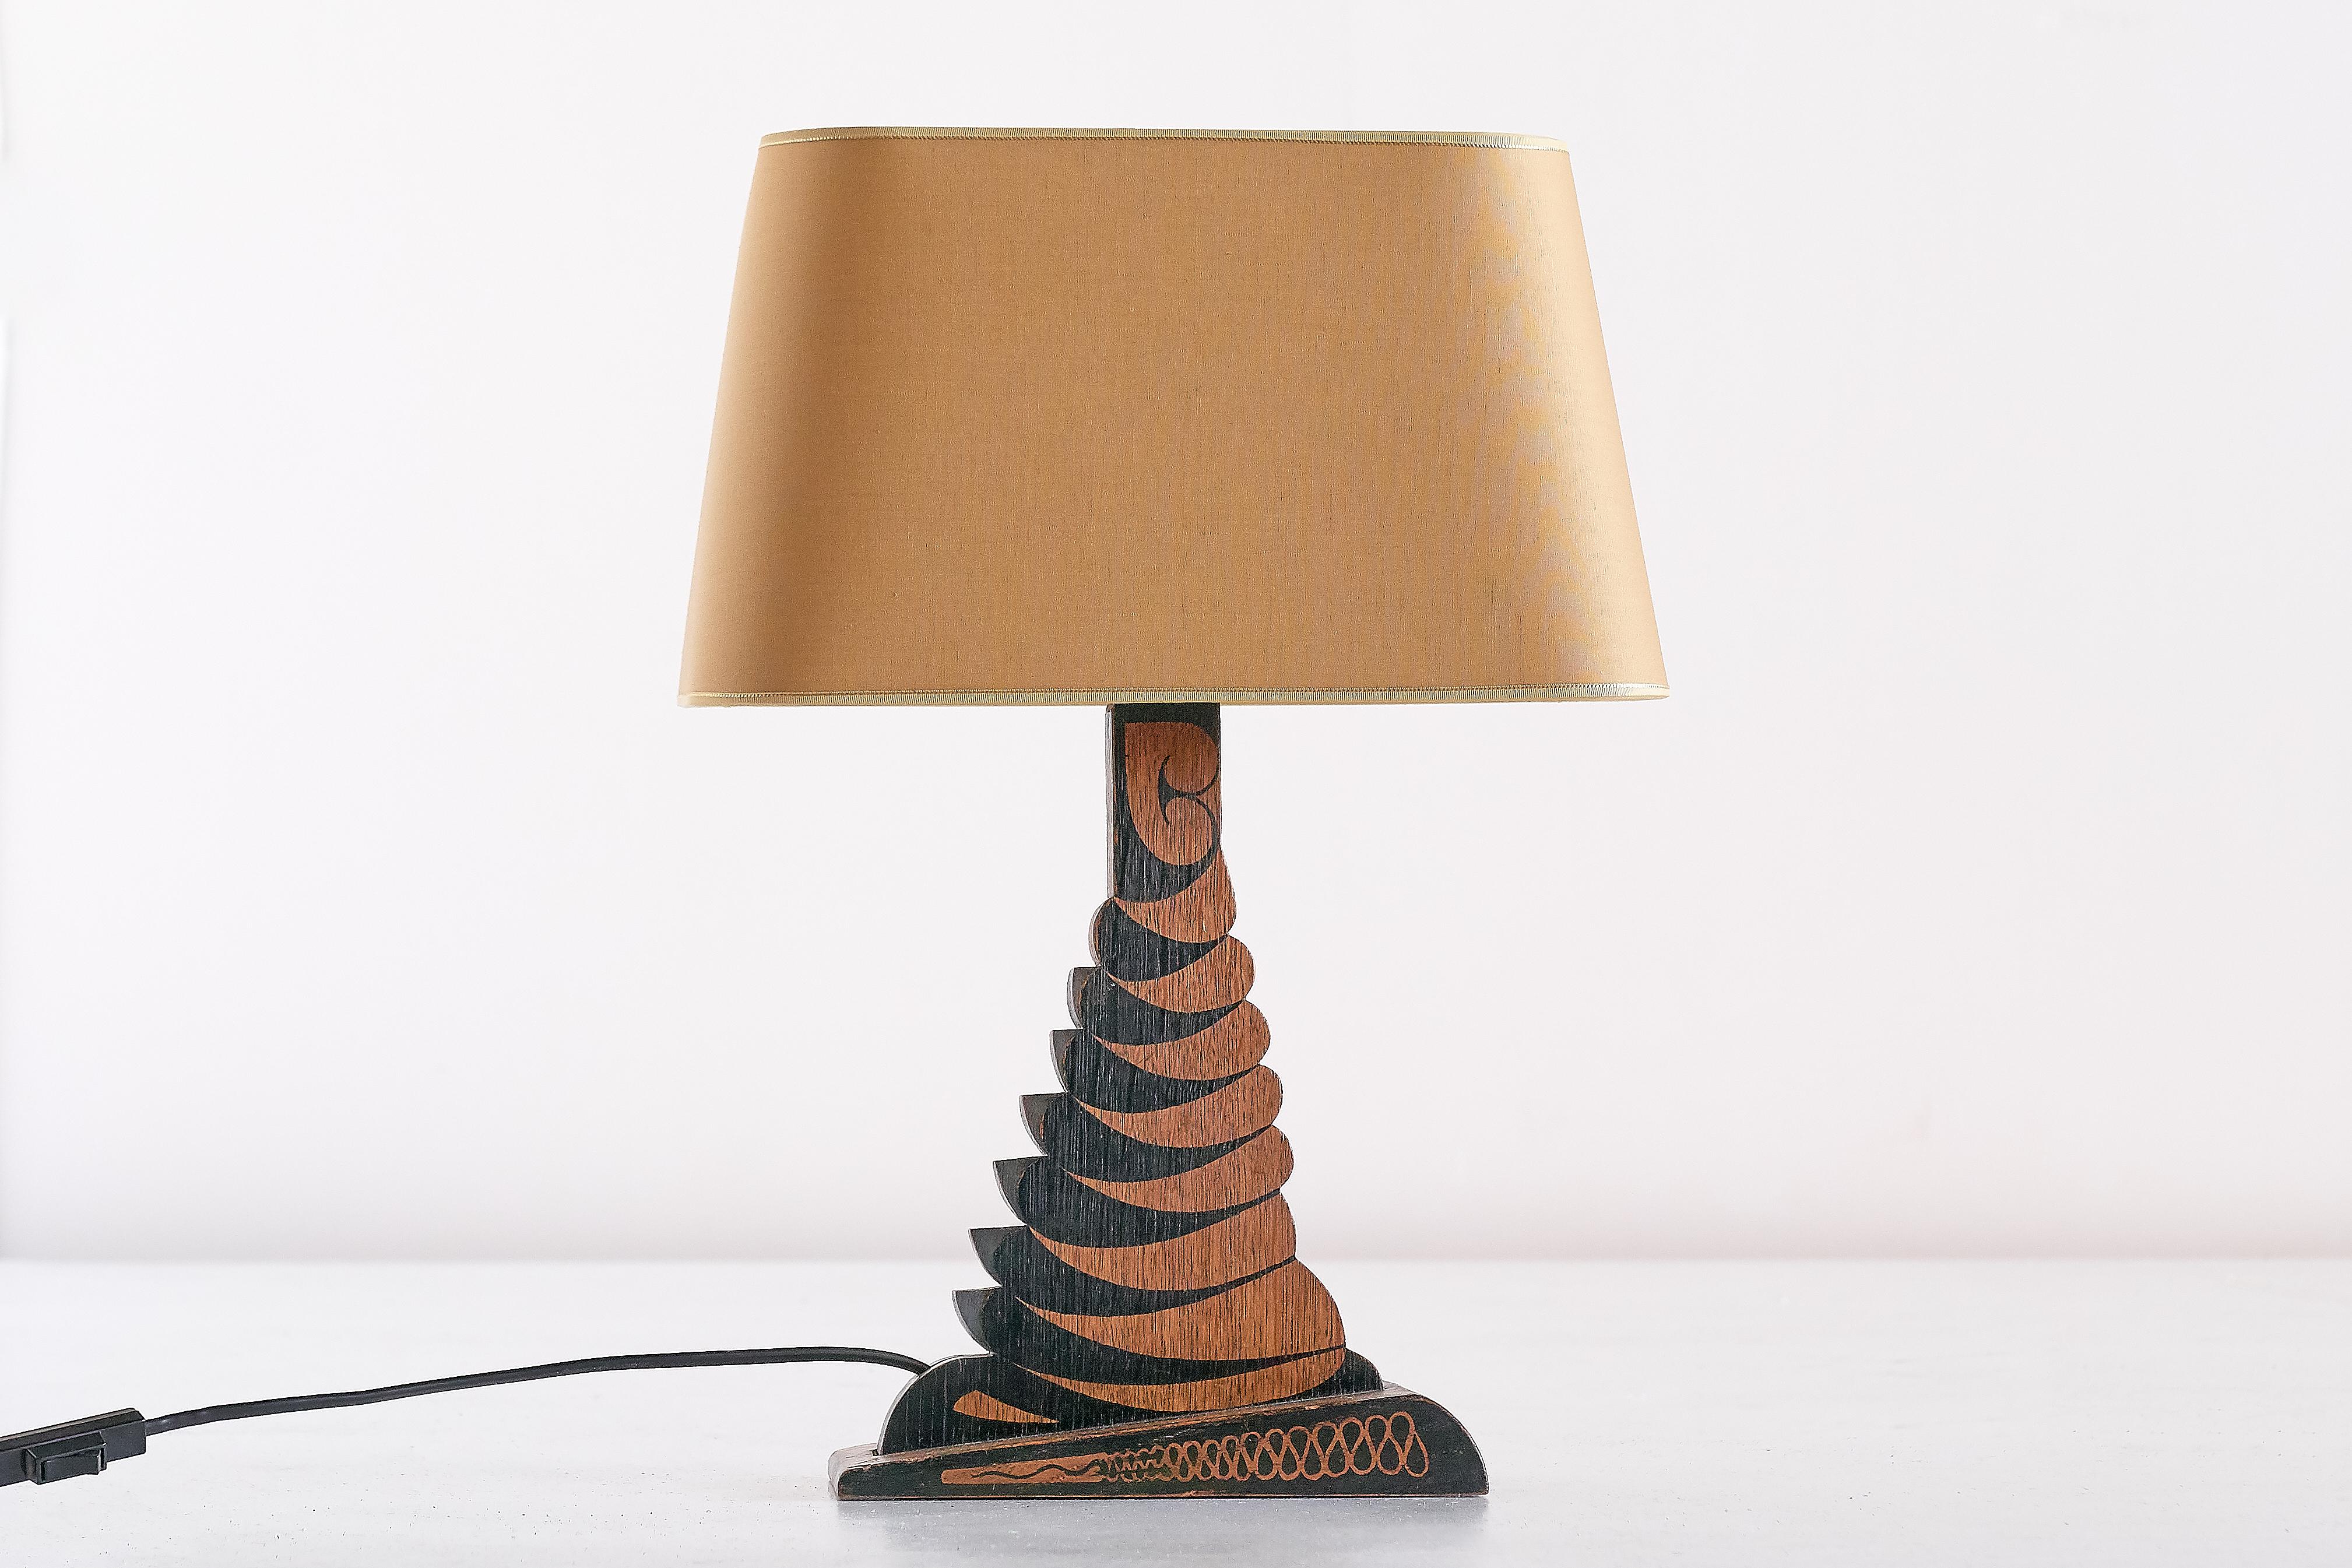 This rare table lamp was designed and made by Louis Bogtman in his workshop in Hilversum, the Netherlands, circa 1925. The lamp has an intricately detailed black batik decoration applied on a carved base in oakwood. The yellow gold shade has been